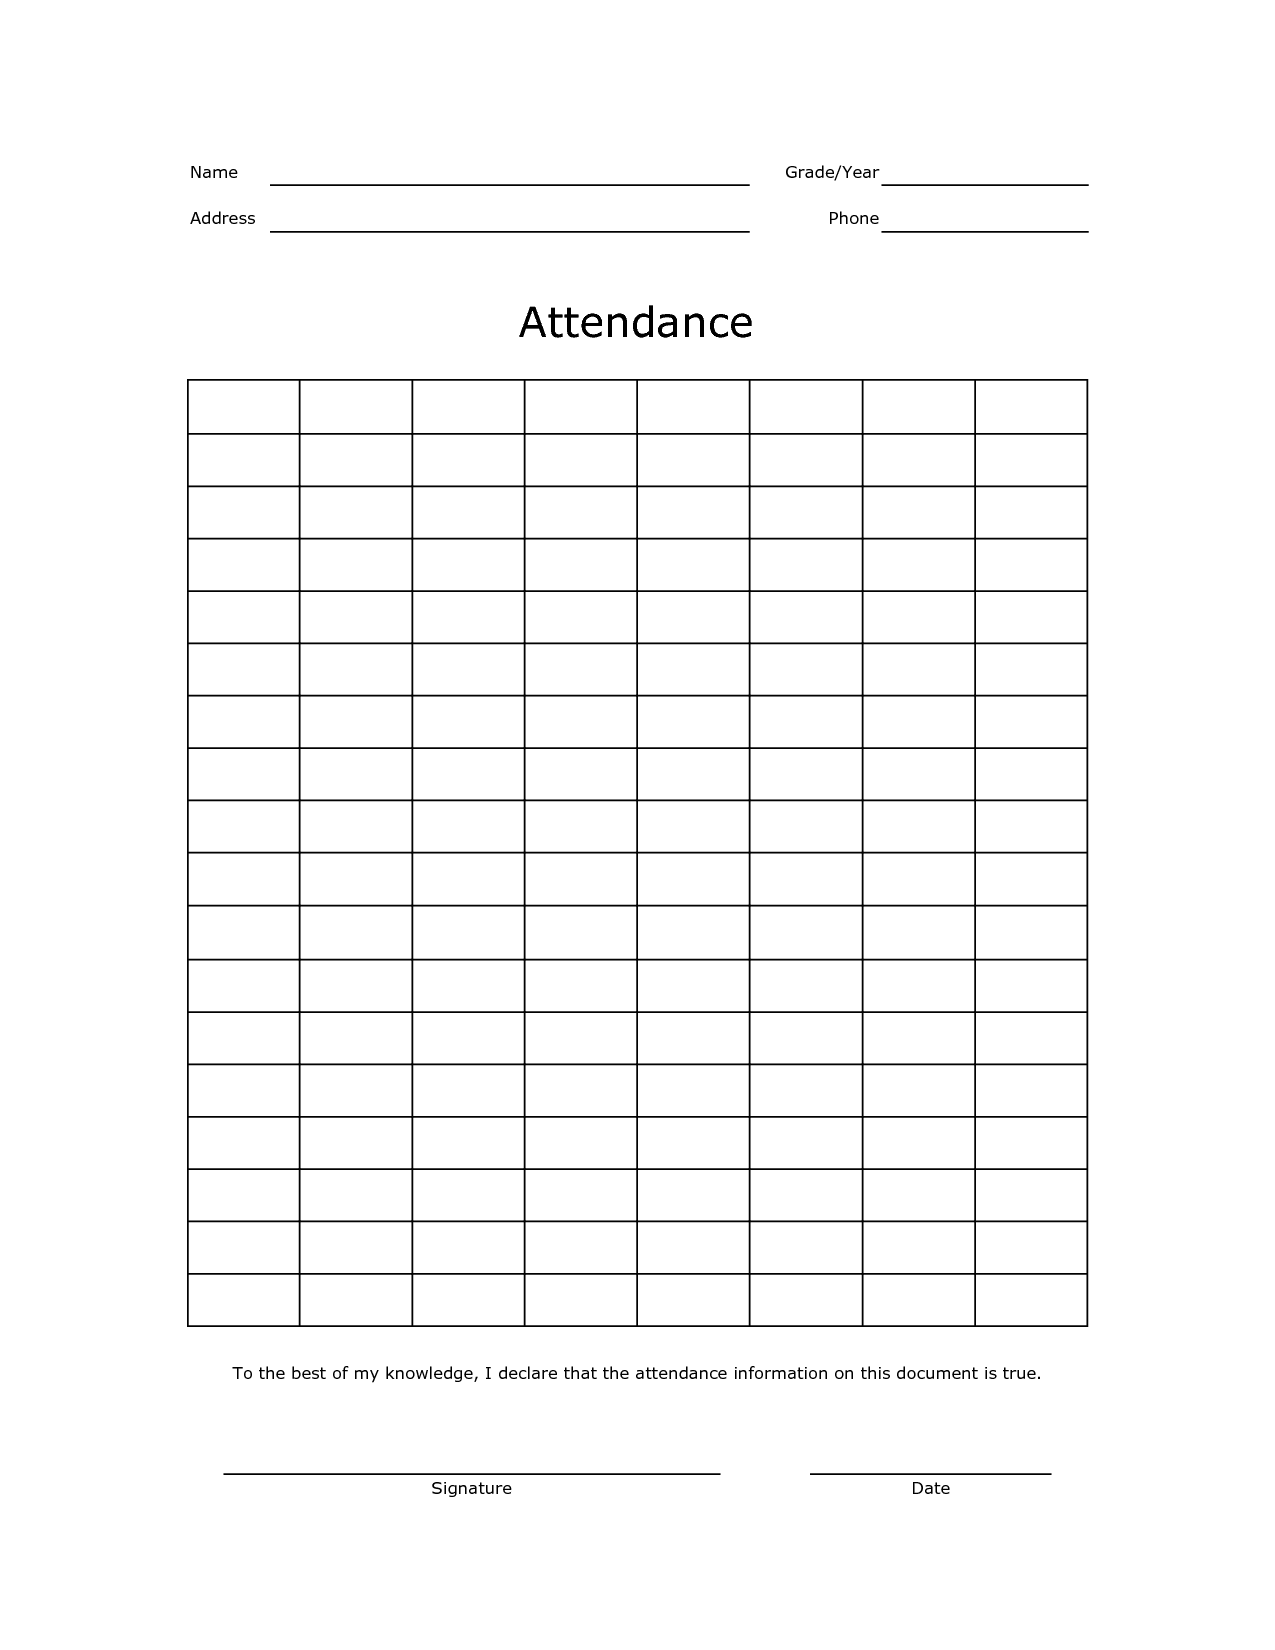 5-best-images-of-free-printable-attendance-roster-forms-school